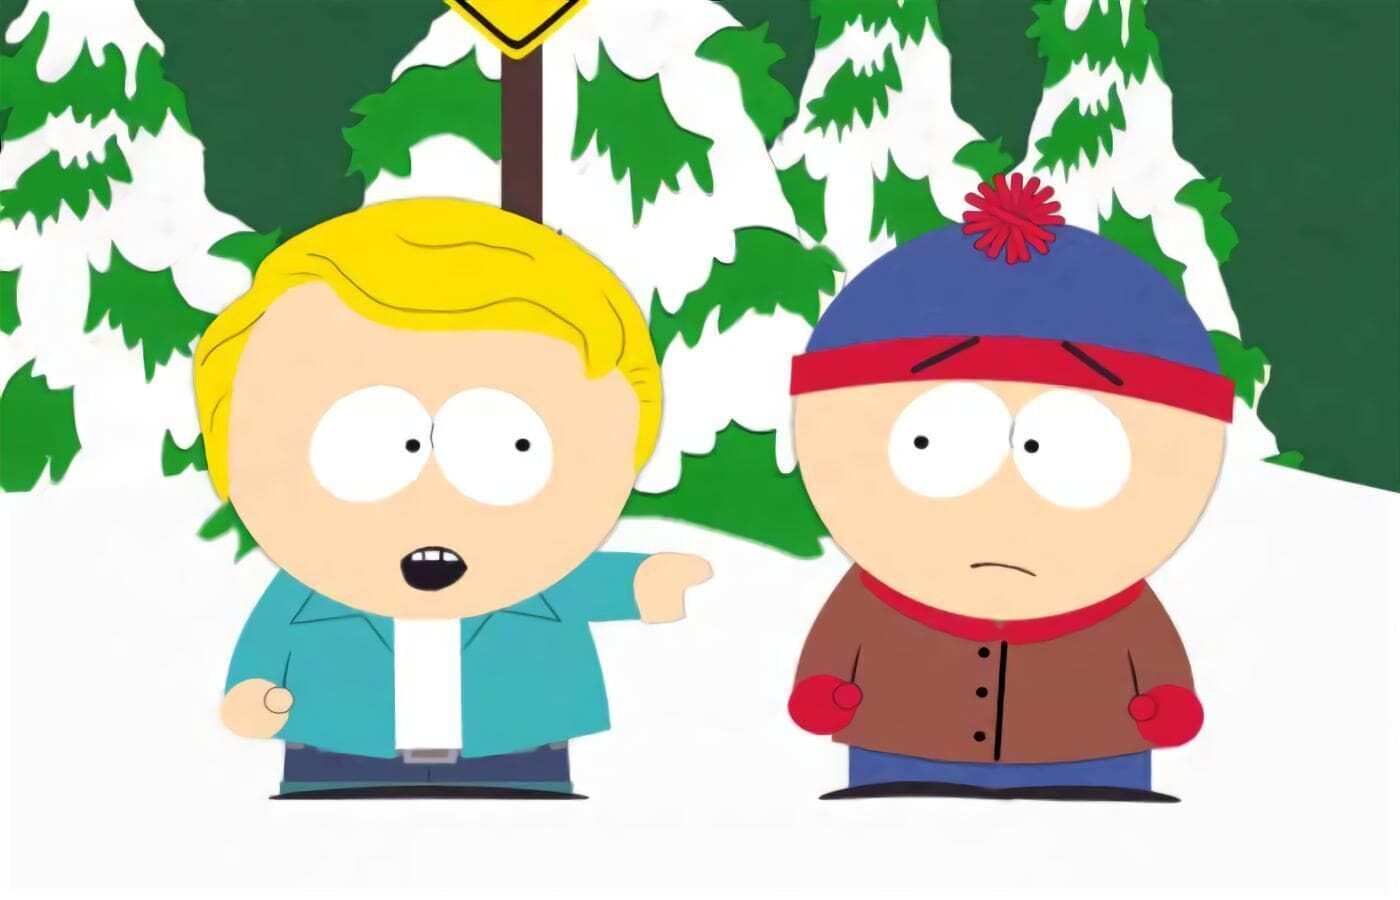 South Park - All About Mormons?